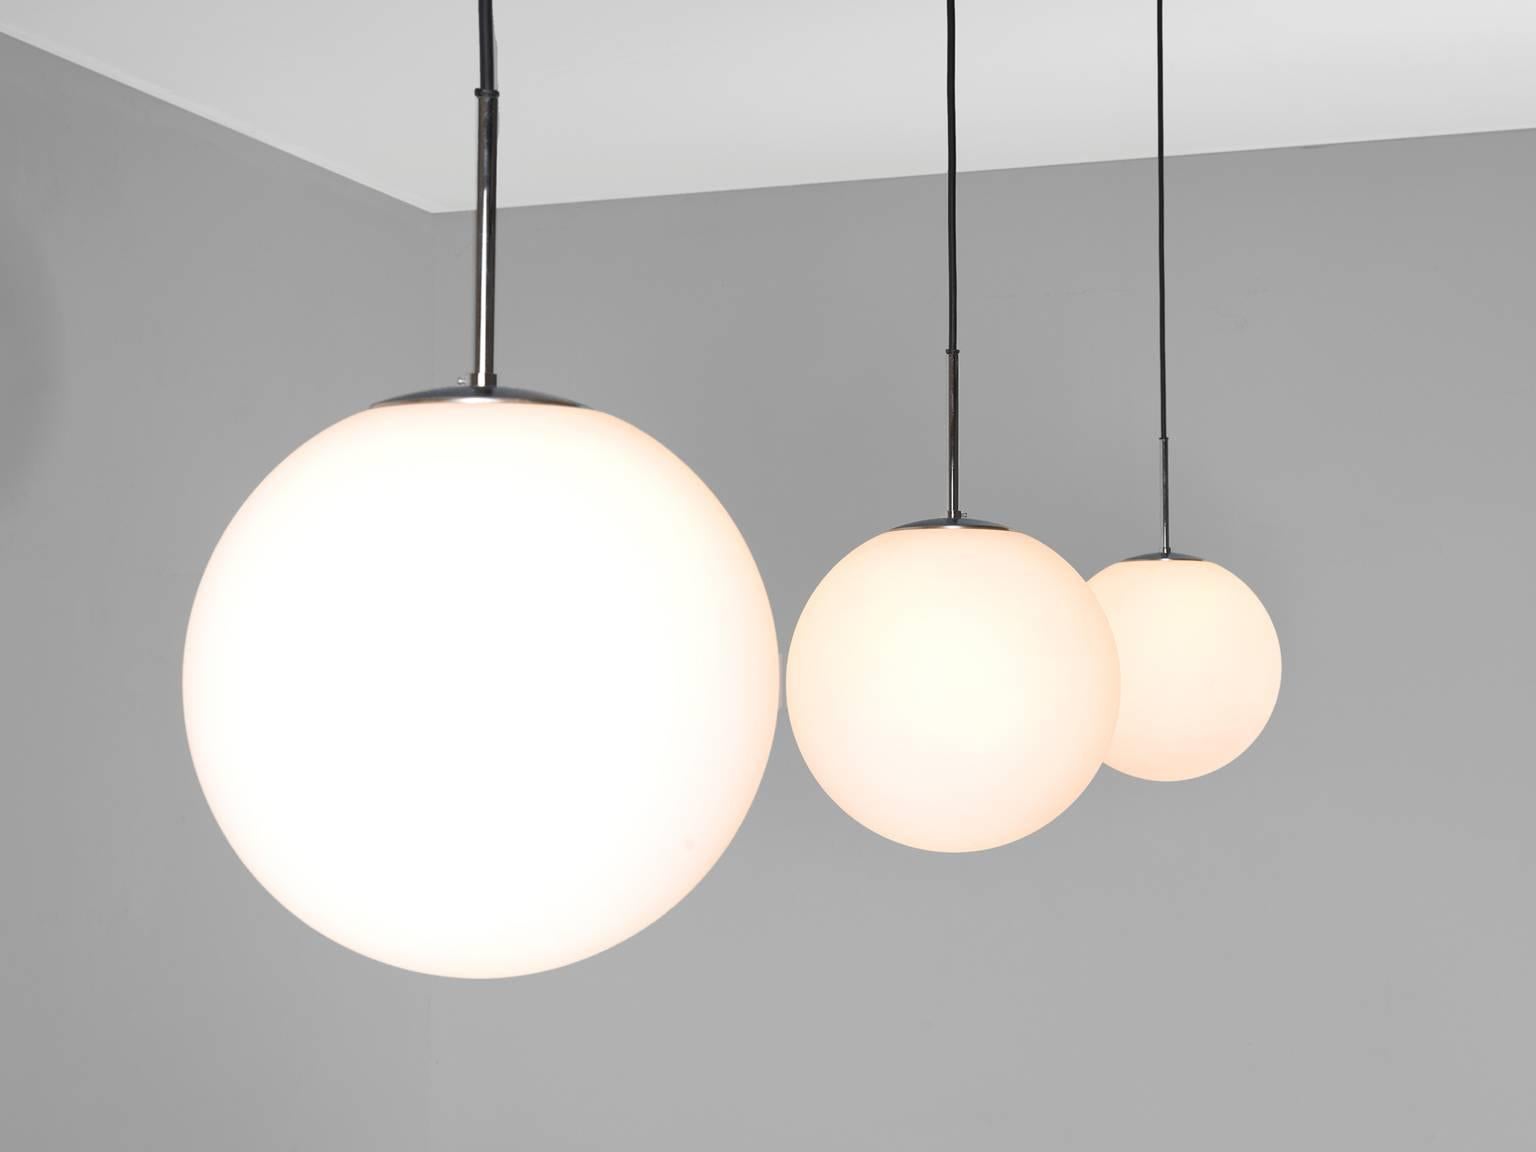 Set of three pendants, in glass and metal, Europe, 1970s.

Set of three modern pendants with white opaline glass globe shaped spheres. The round glass pendants are typical for midcentury lighting as they are softly and delicate and at the same